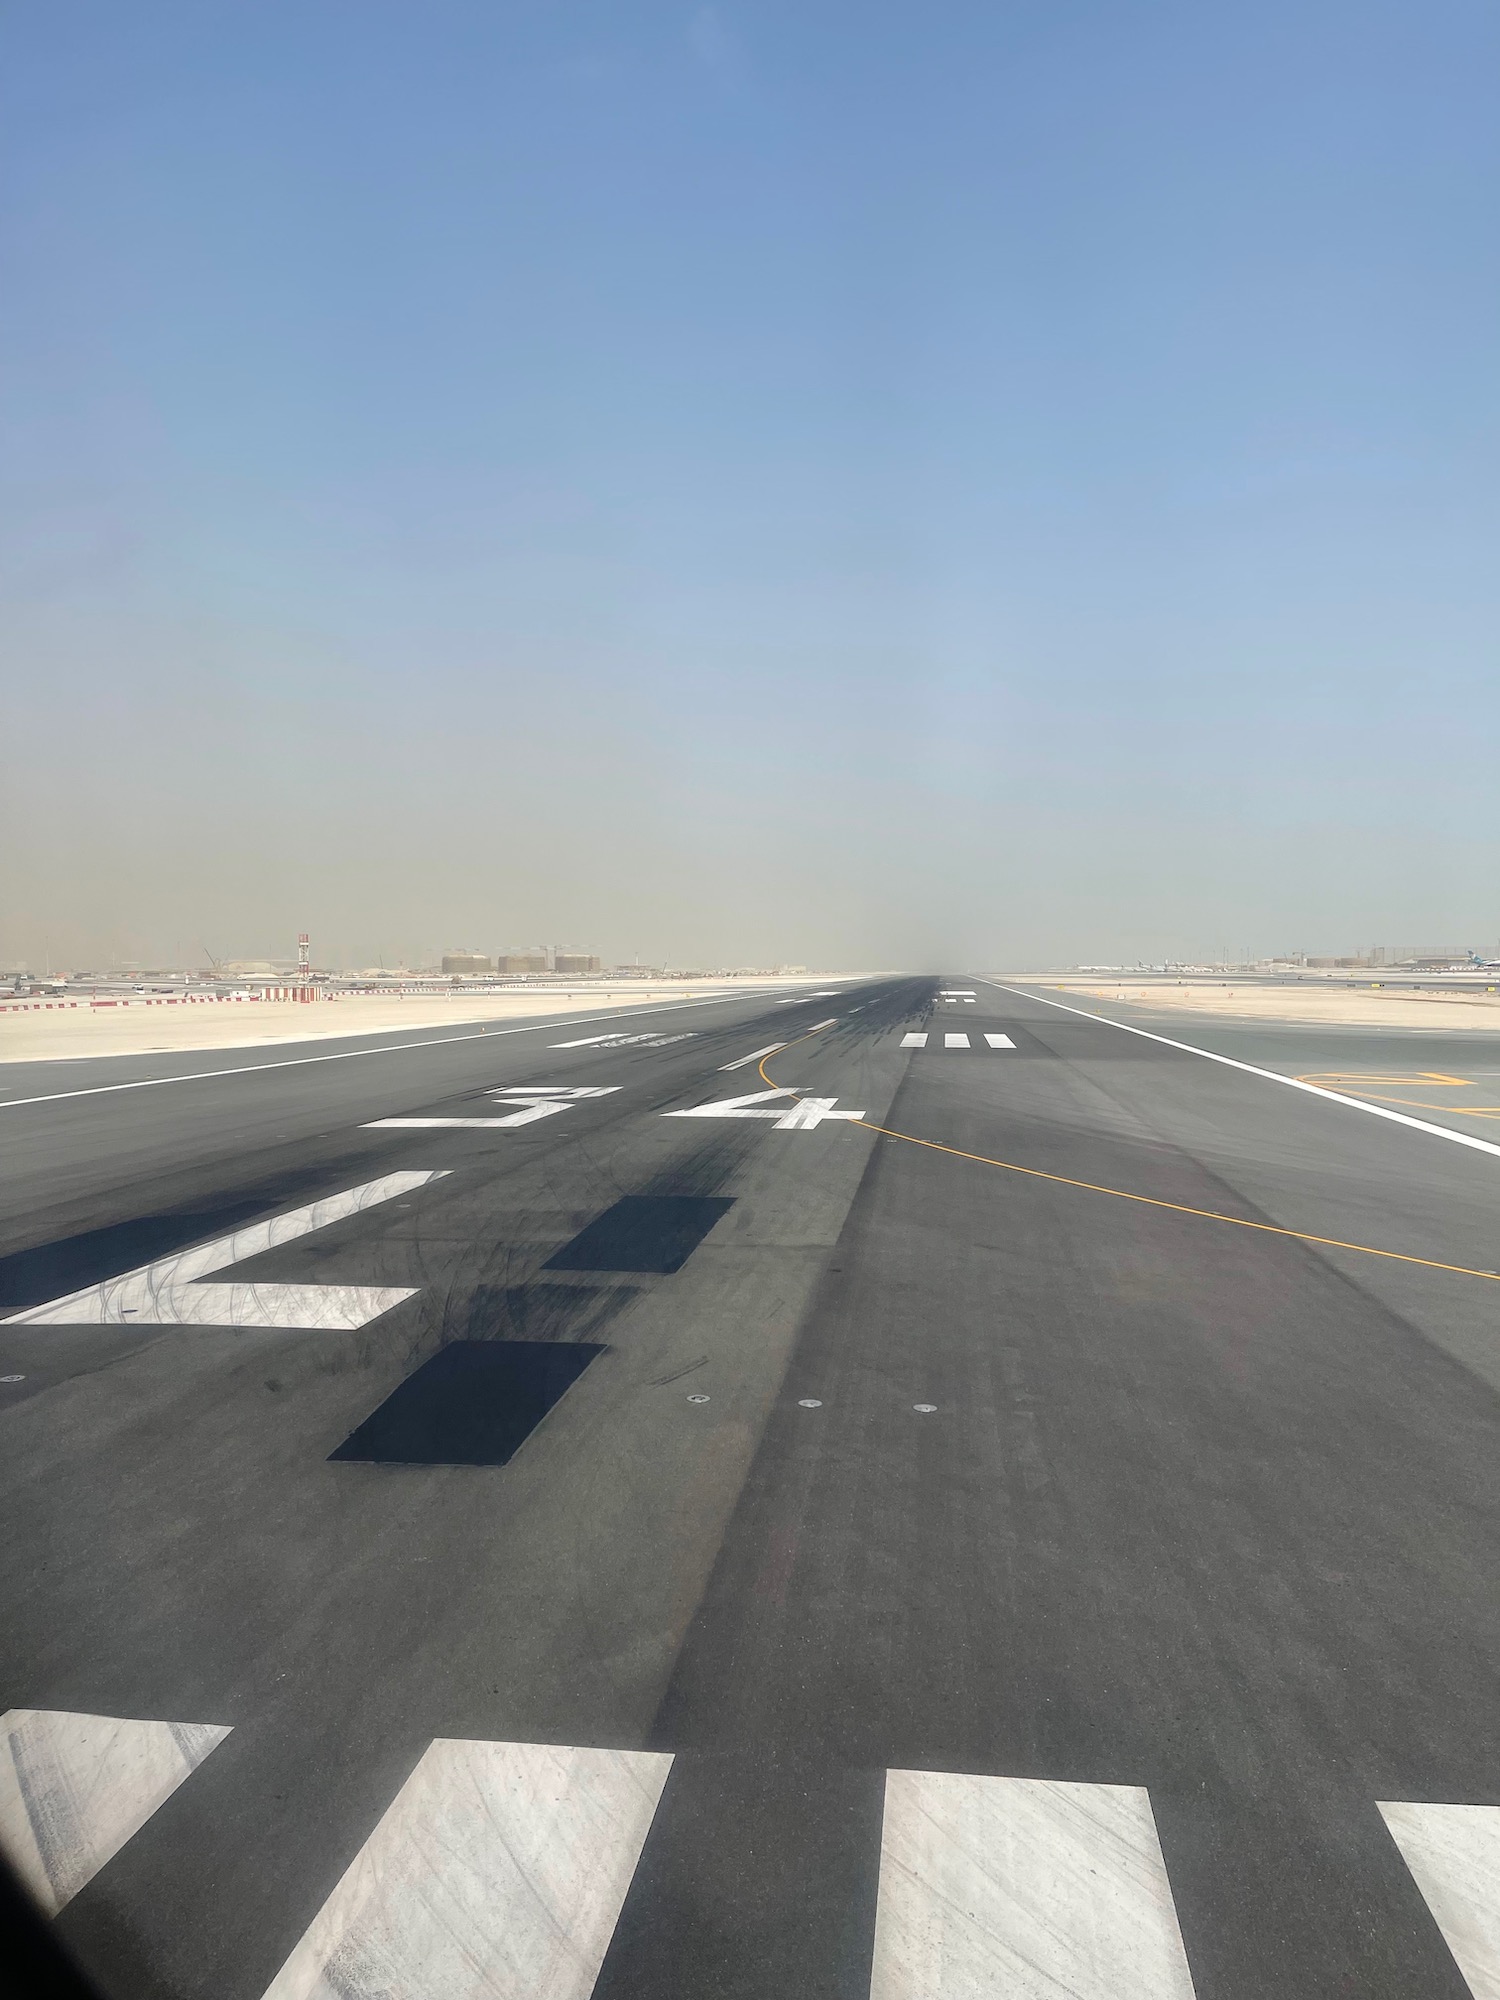 a runway with white markings and a blue sky